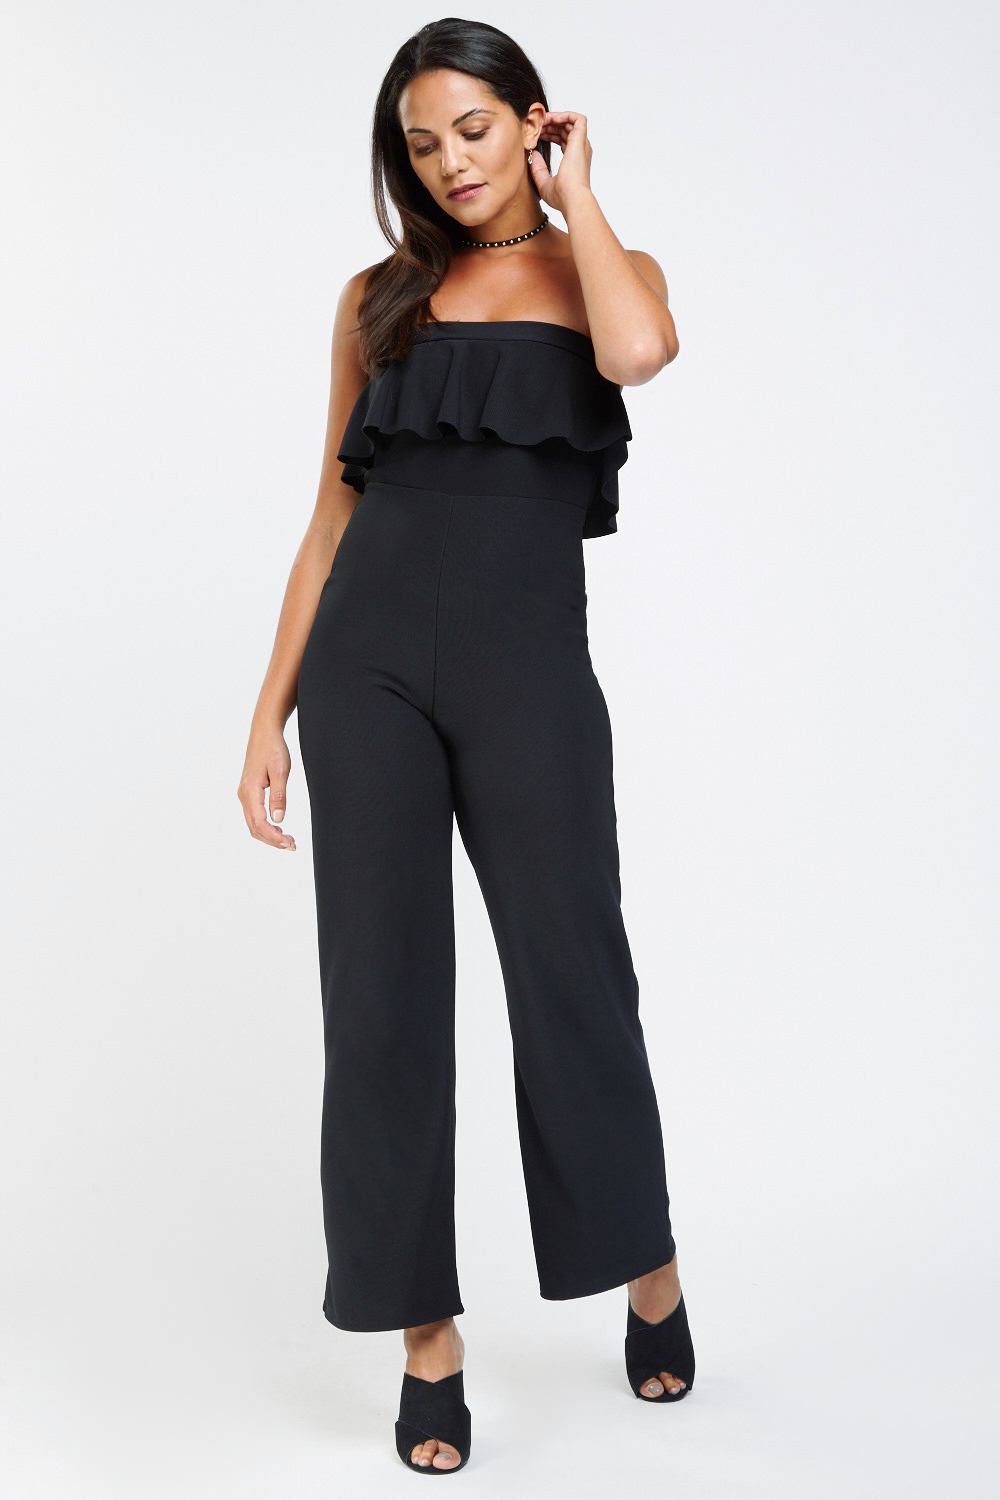 strapless jumpsuit with skirt overlay